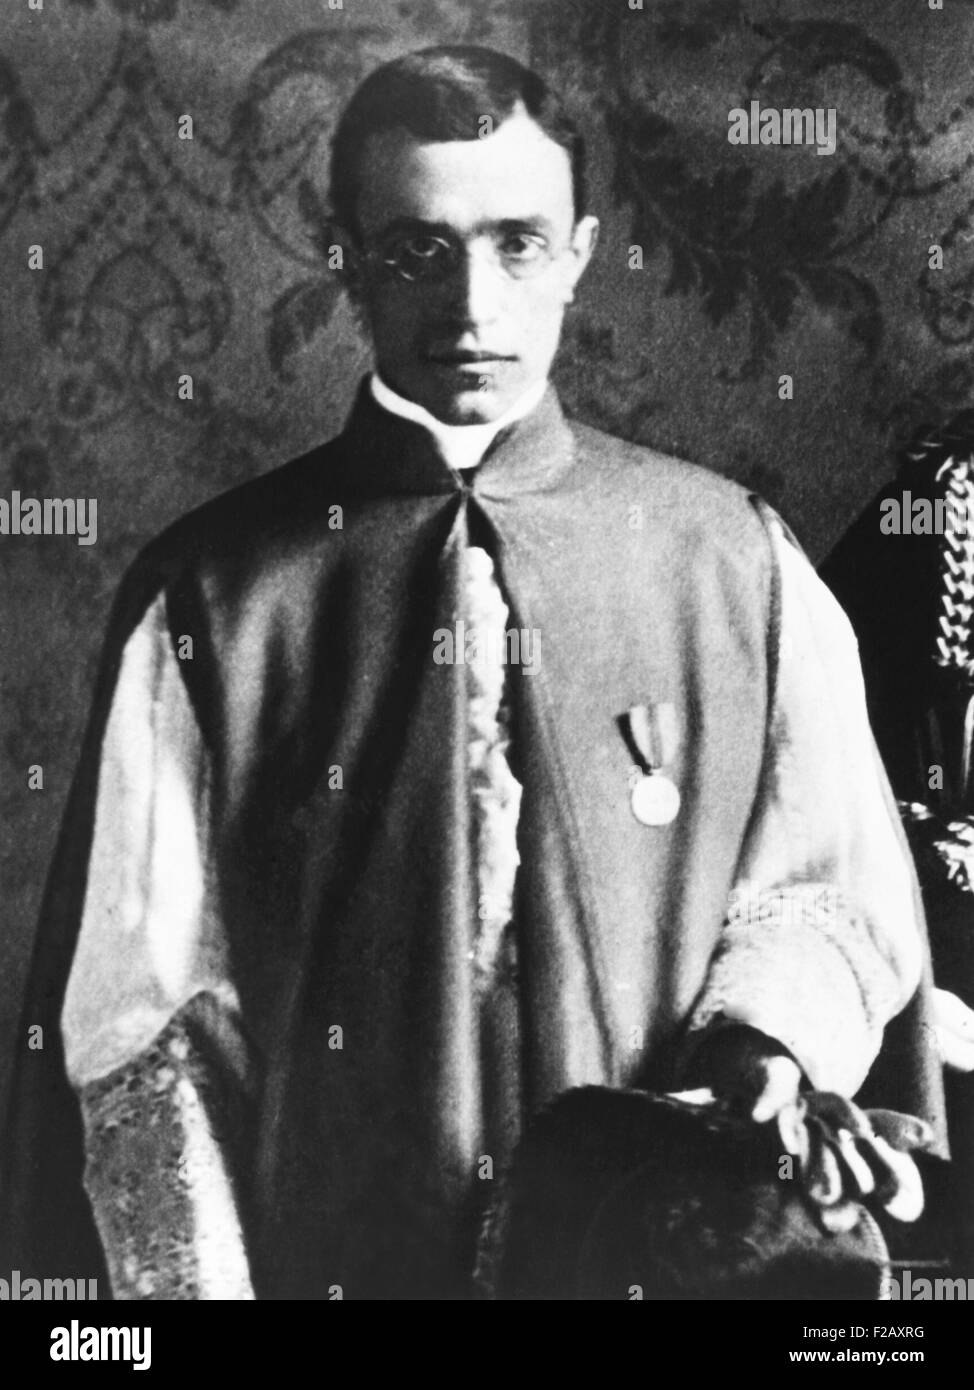 Eugenio Pacelli, the future Pope Pius XII, in London for the Coronation of King George V. June 1911. (CSU 2015 9 993) Stock Photo